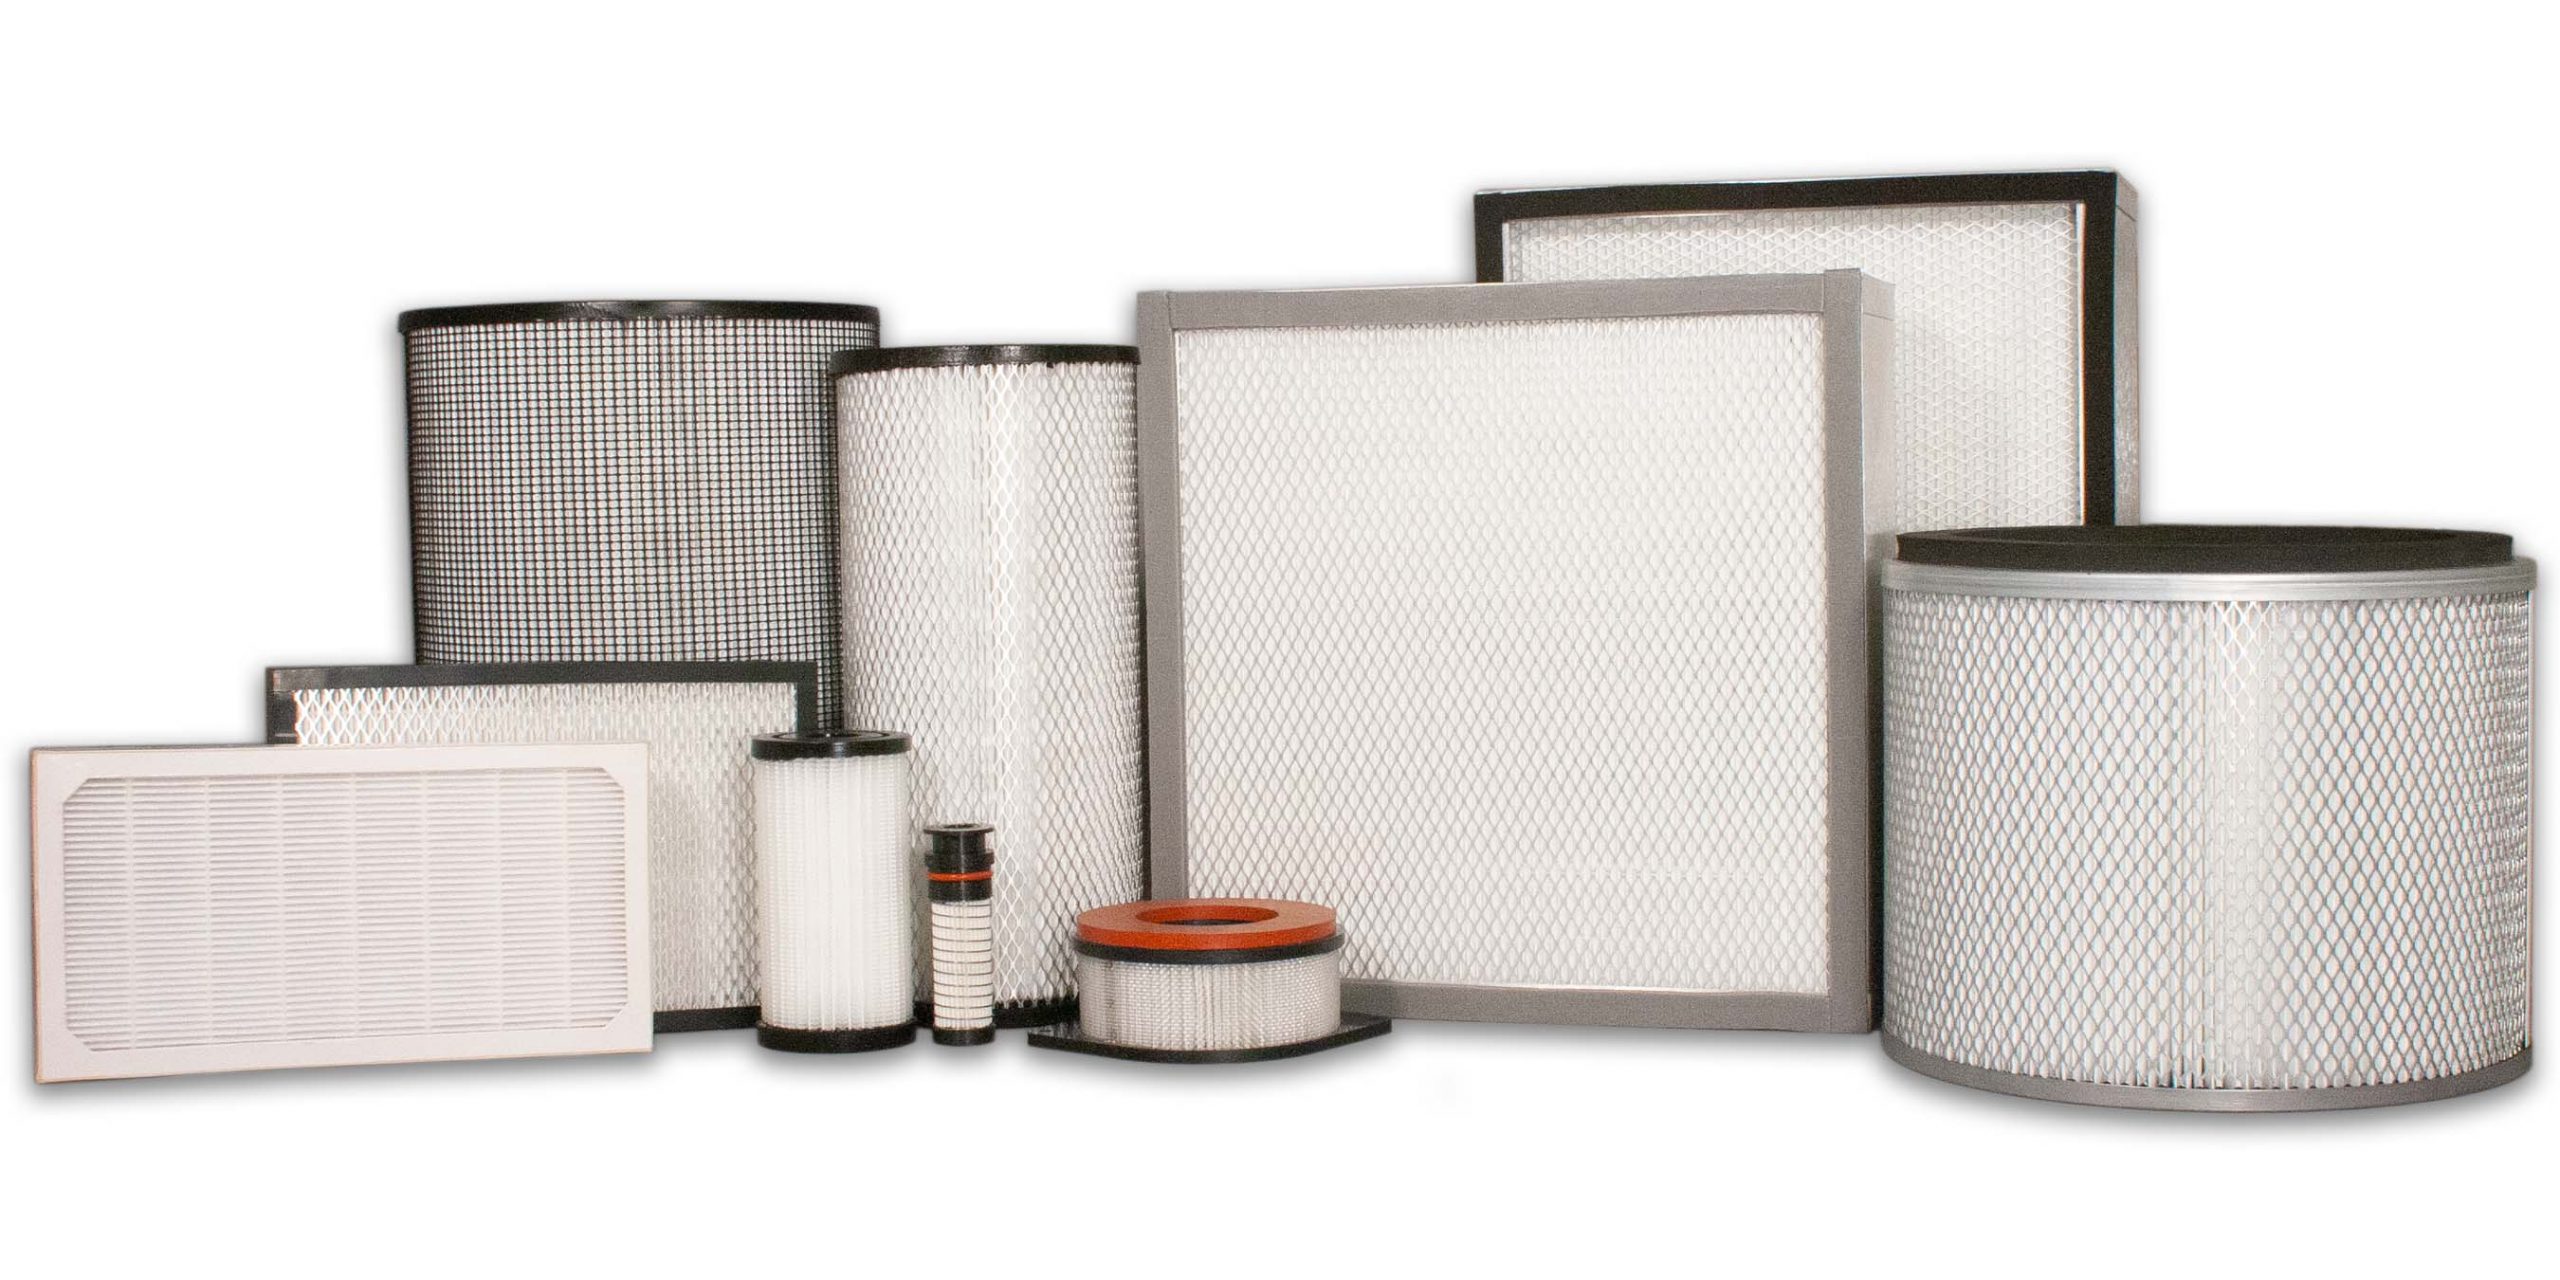 Sidco-Filter-HEPA-Filter-Manufacturing-for-OEMs